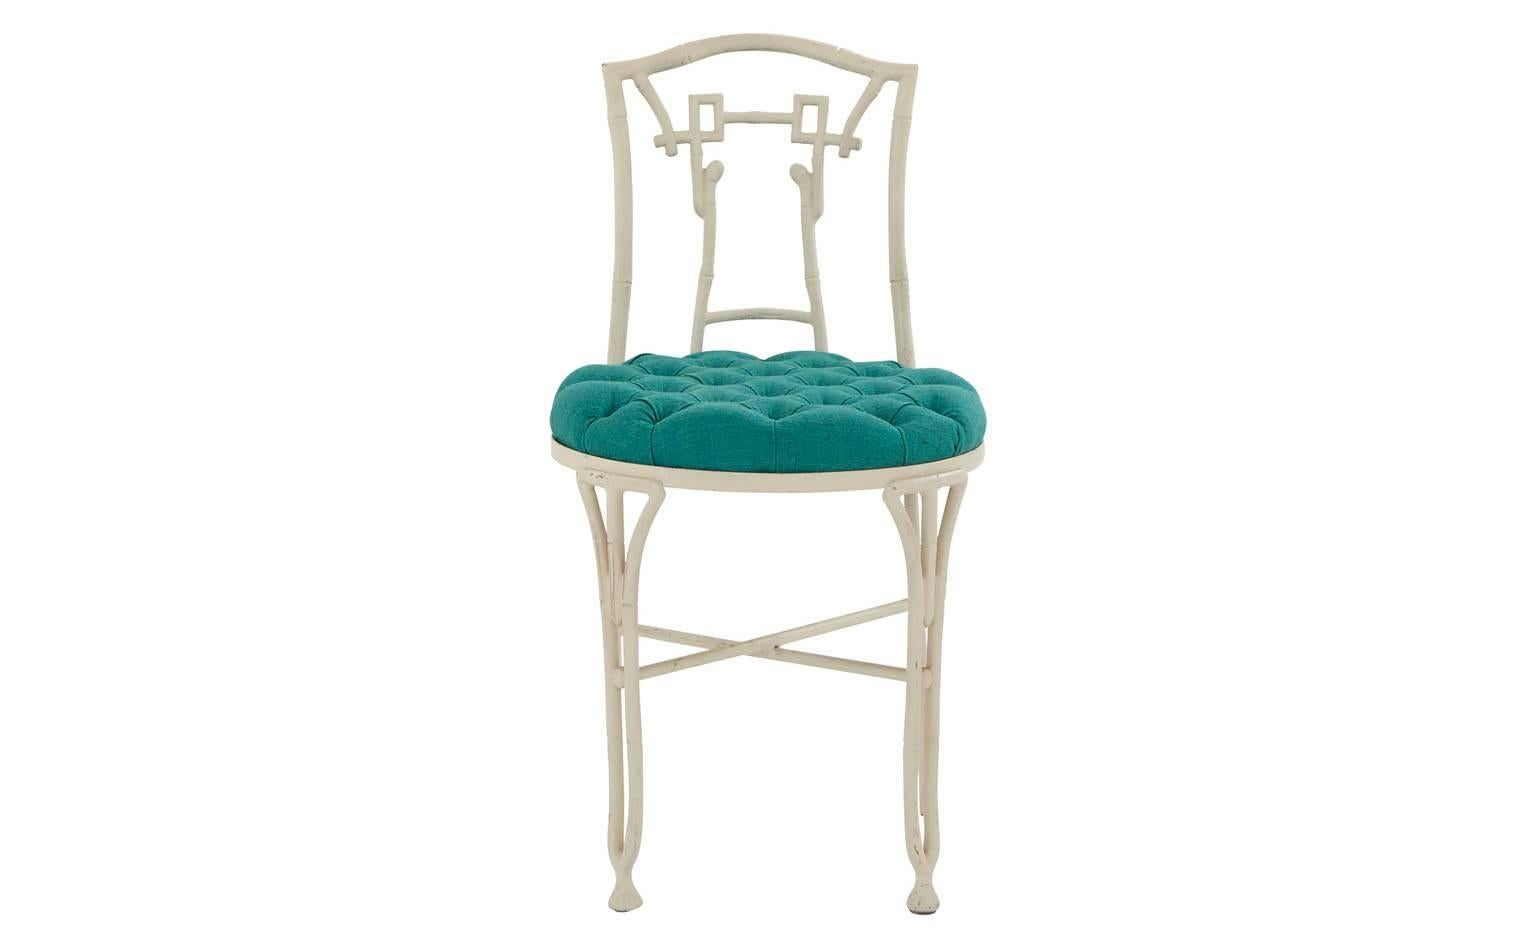 Reupholstered in jade green fabric
Metal faux bamboo frame
White painted finish as found
20th century
American
Set of two available (priced individually).

Dimensions:
Overall: 17'W x 20'D x 30.75'H 
Seat depth: 19'D
Seat height: 17.5'H